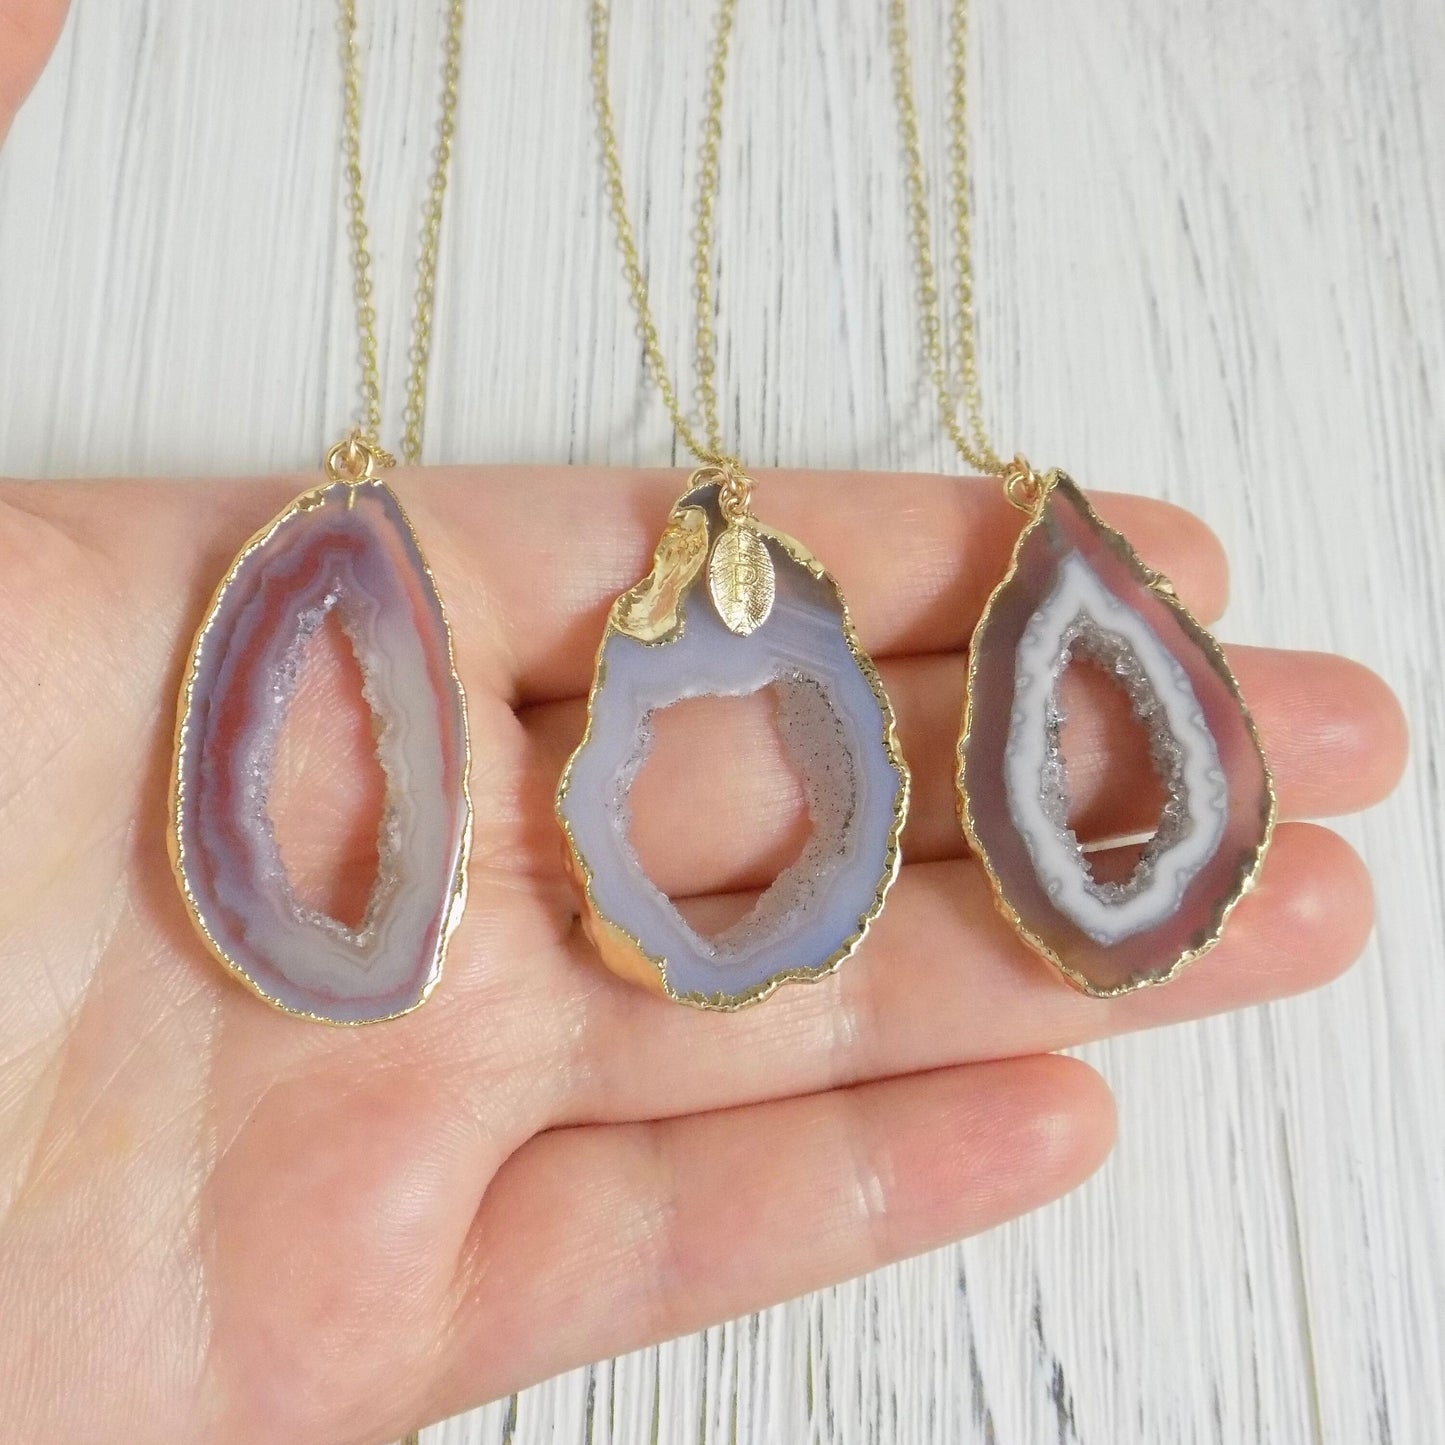 Unique Gifts For Women - Geode Necklace